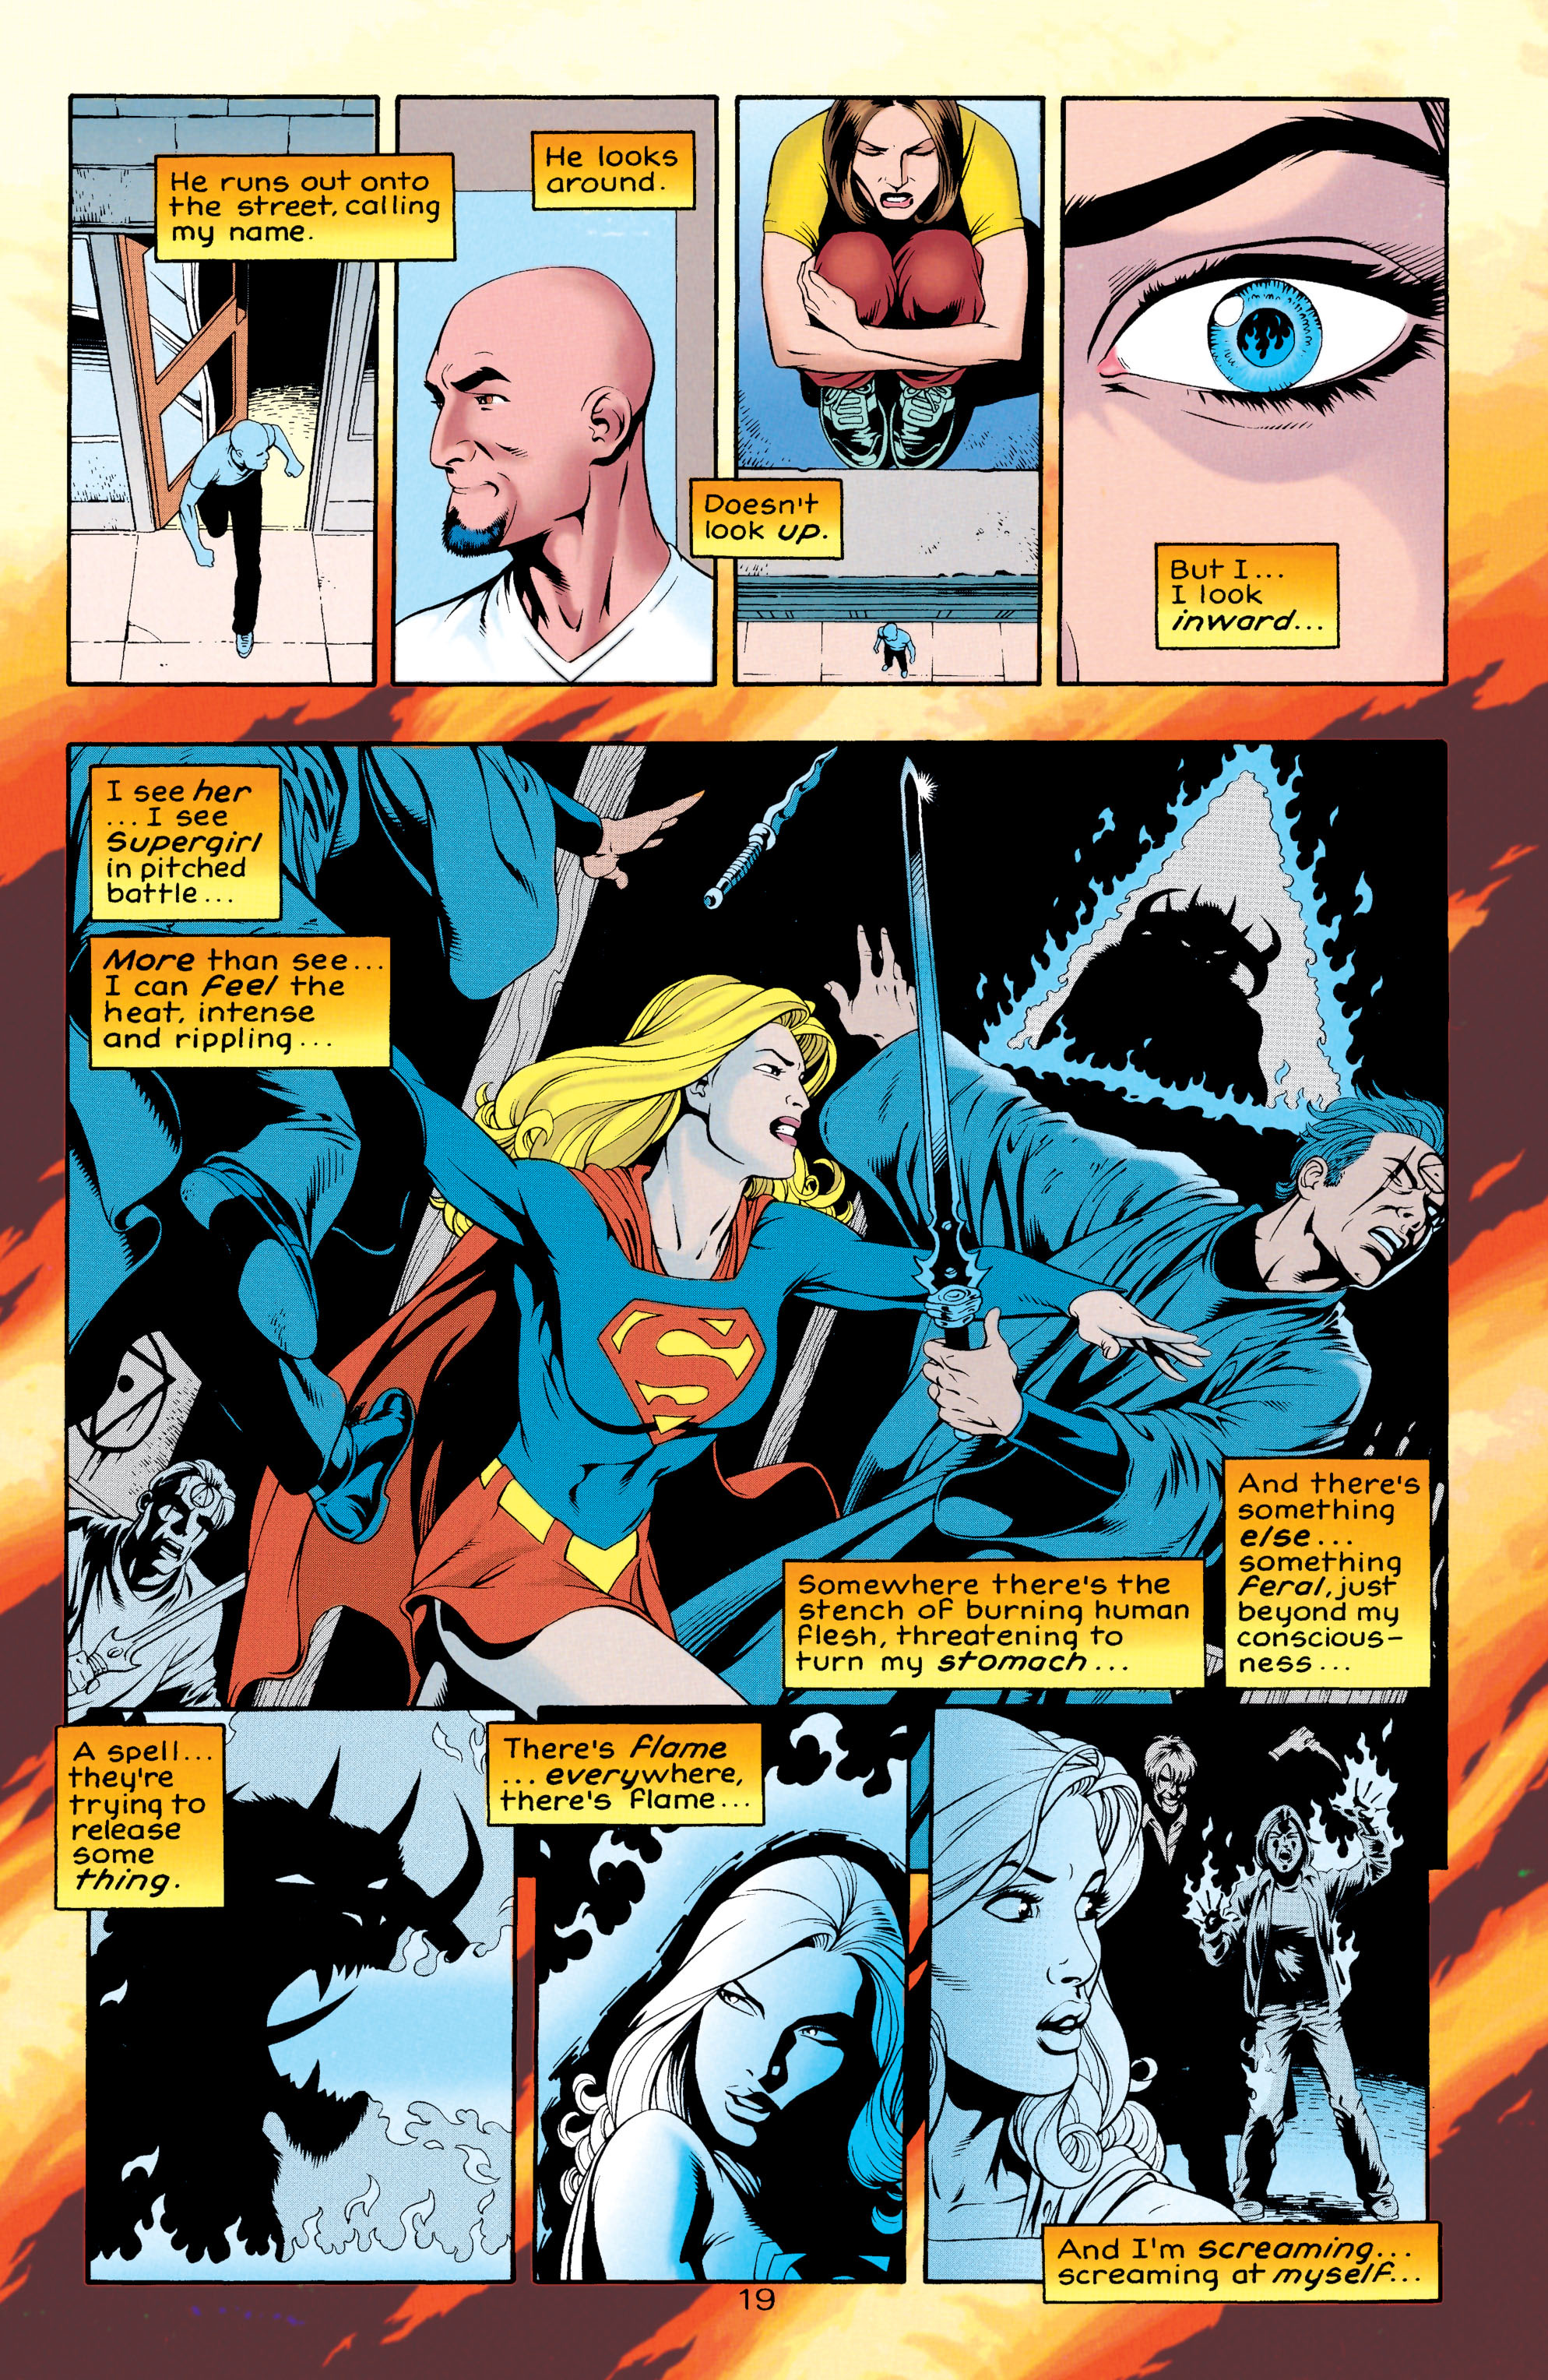 Supergirl (1996) 1 Page 19